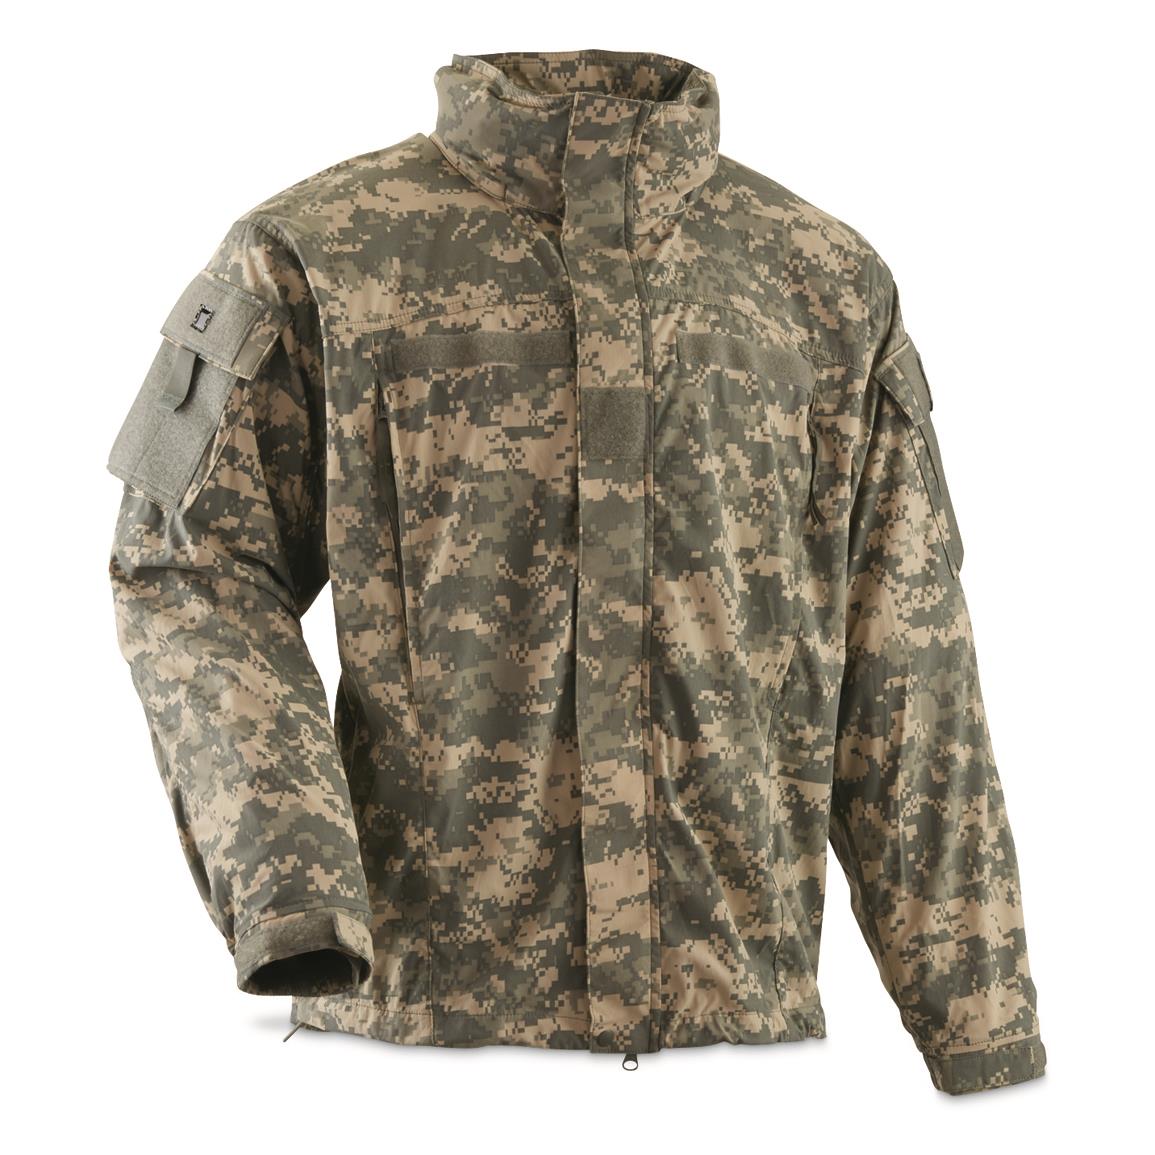 U S Army Surplus Ecwcs Gen 3 Level 5 Soft Shell Jacket New Insulated Military Jackets At Sportsman S Guide